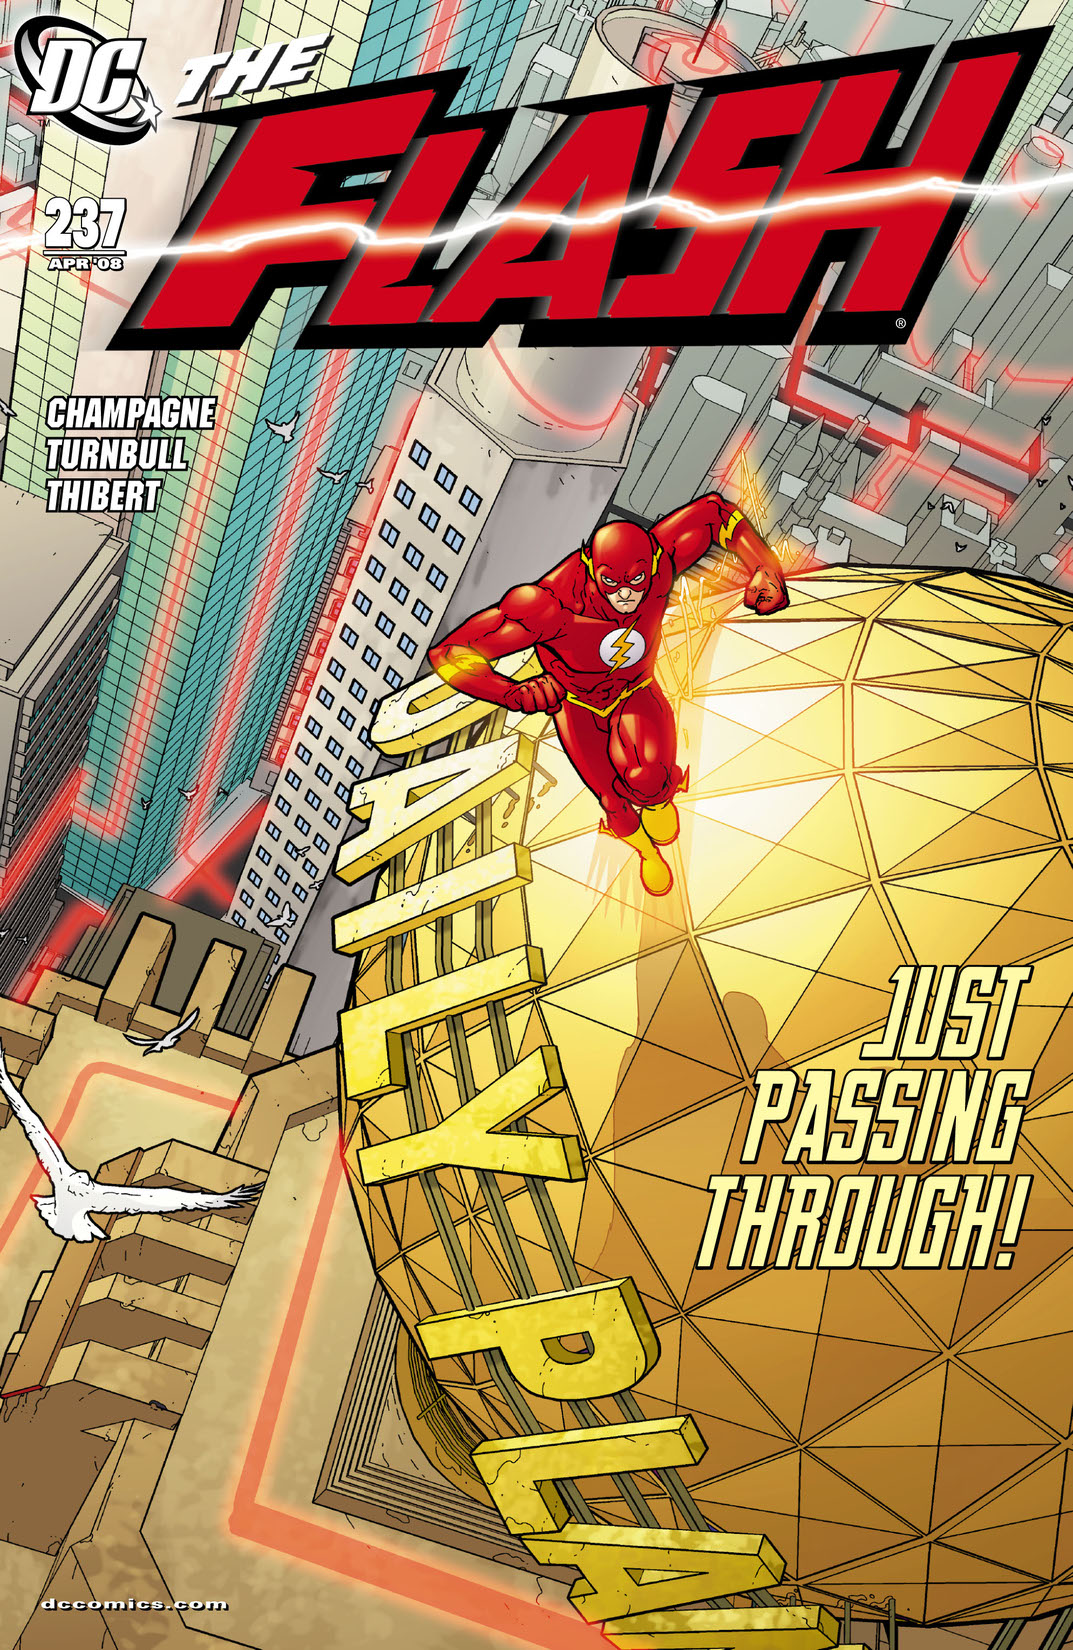 The Flash (1987-) #237 preview images